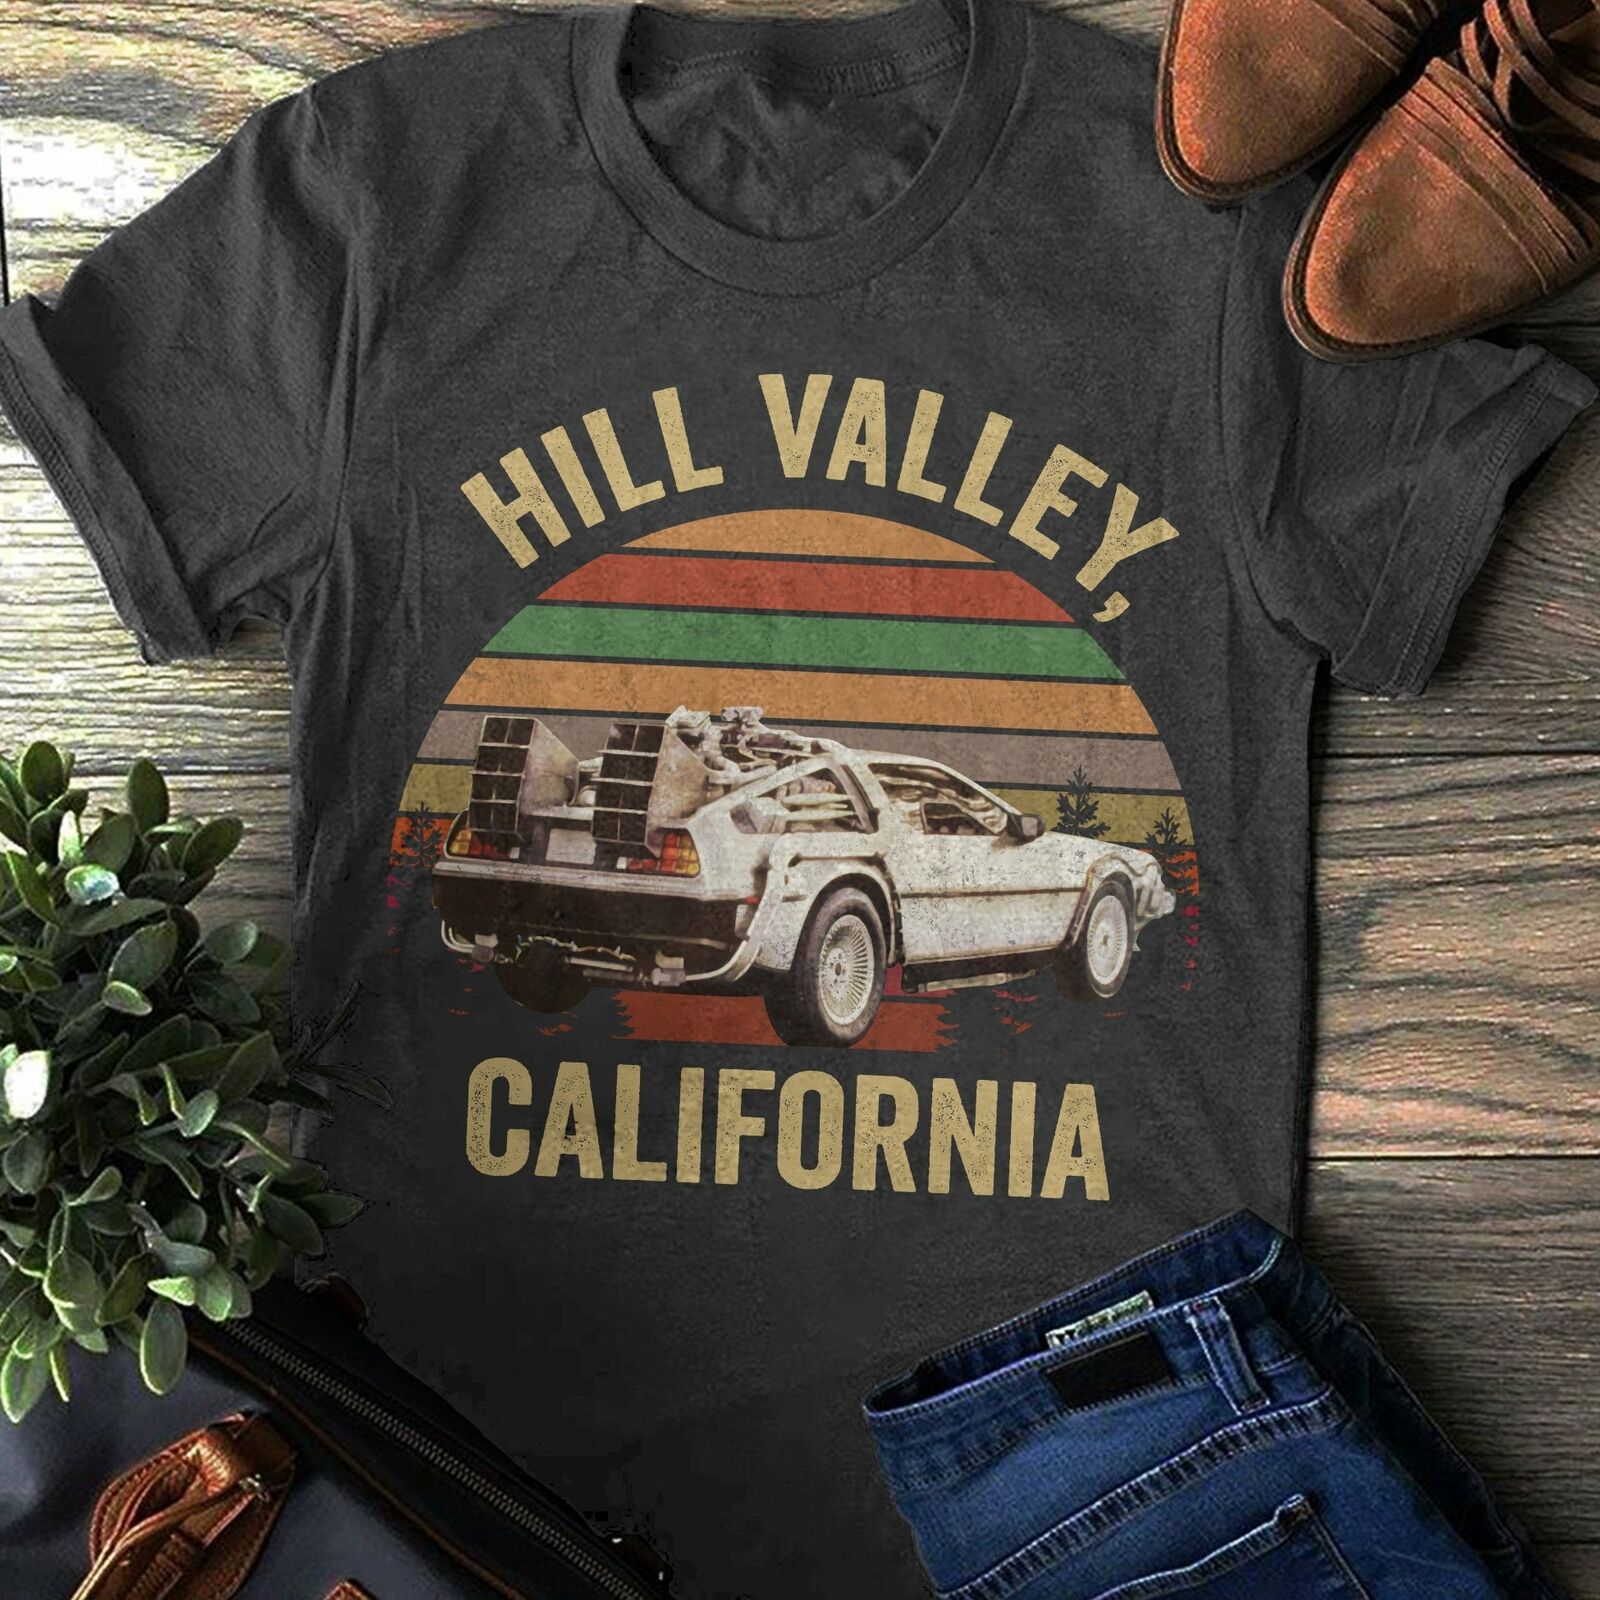 "Hill Valley" Back to the Future T-Shirt